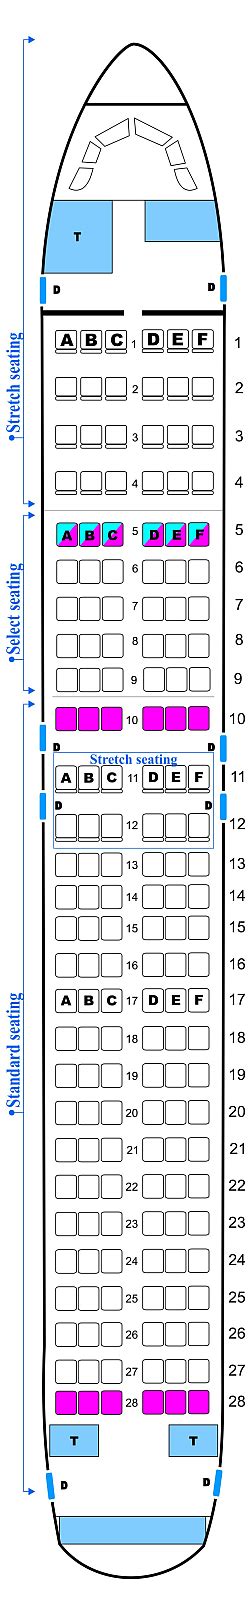 Frontier Airlines Seat Map A320